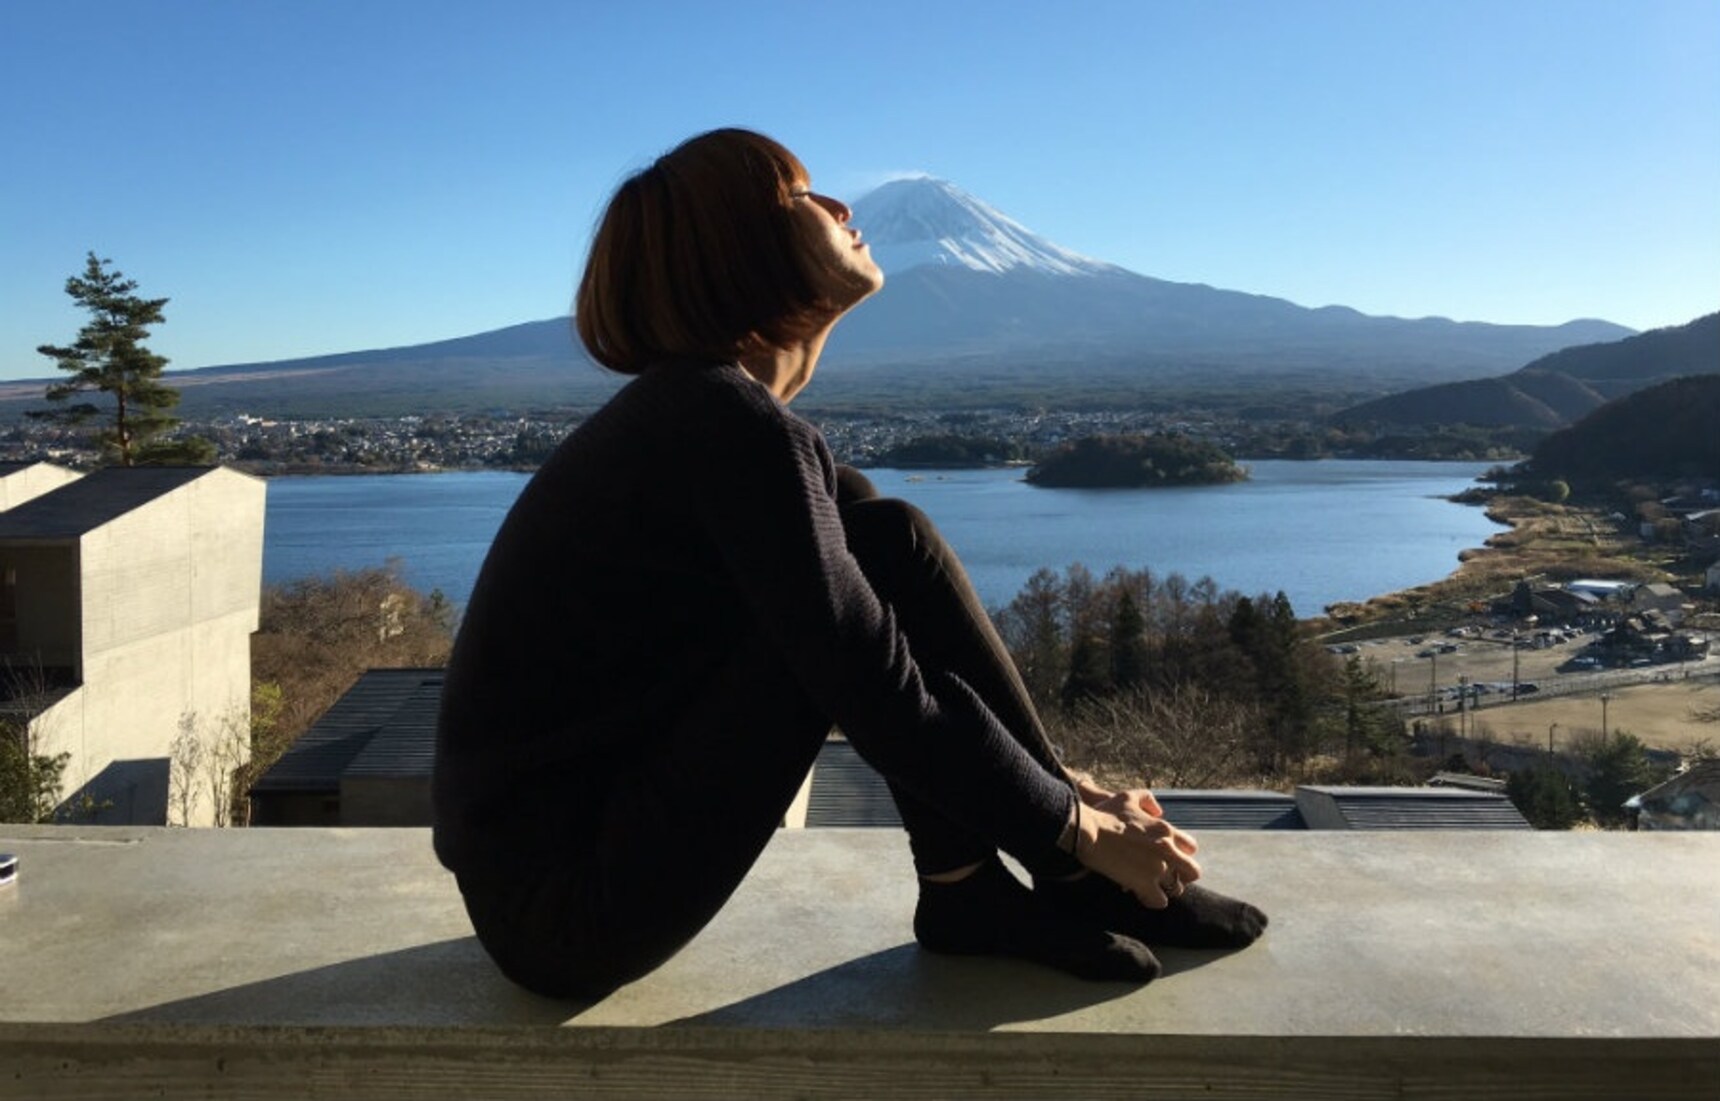 Photos from Japan to You